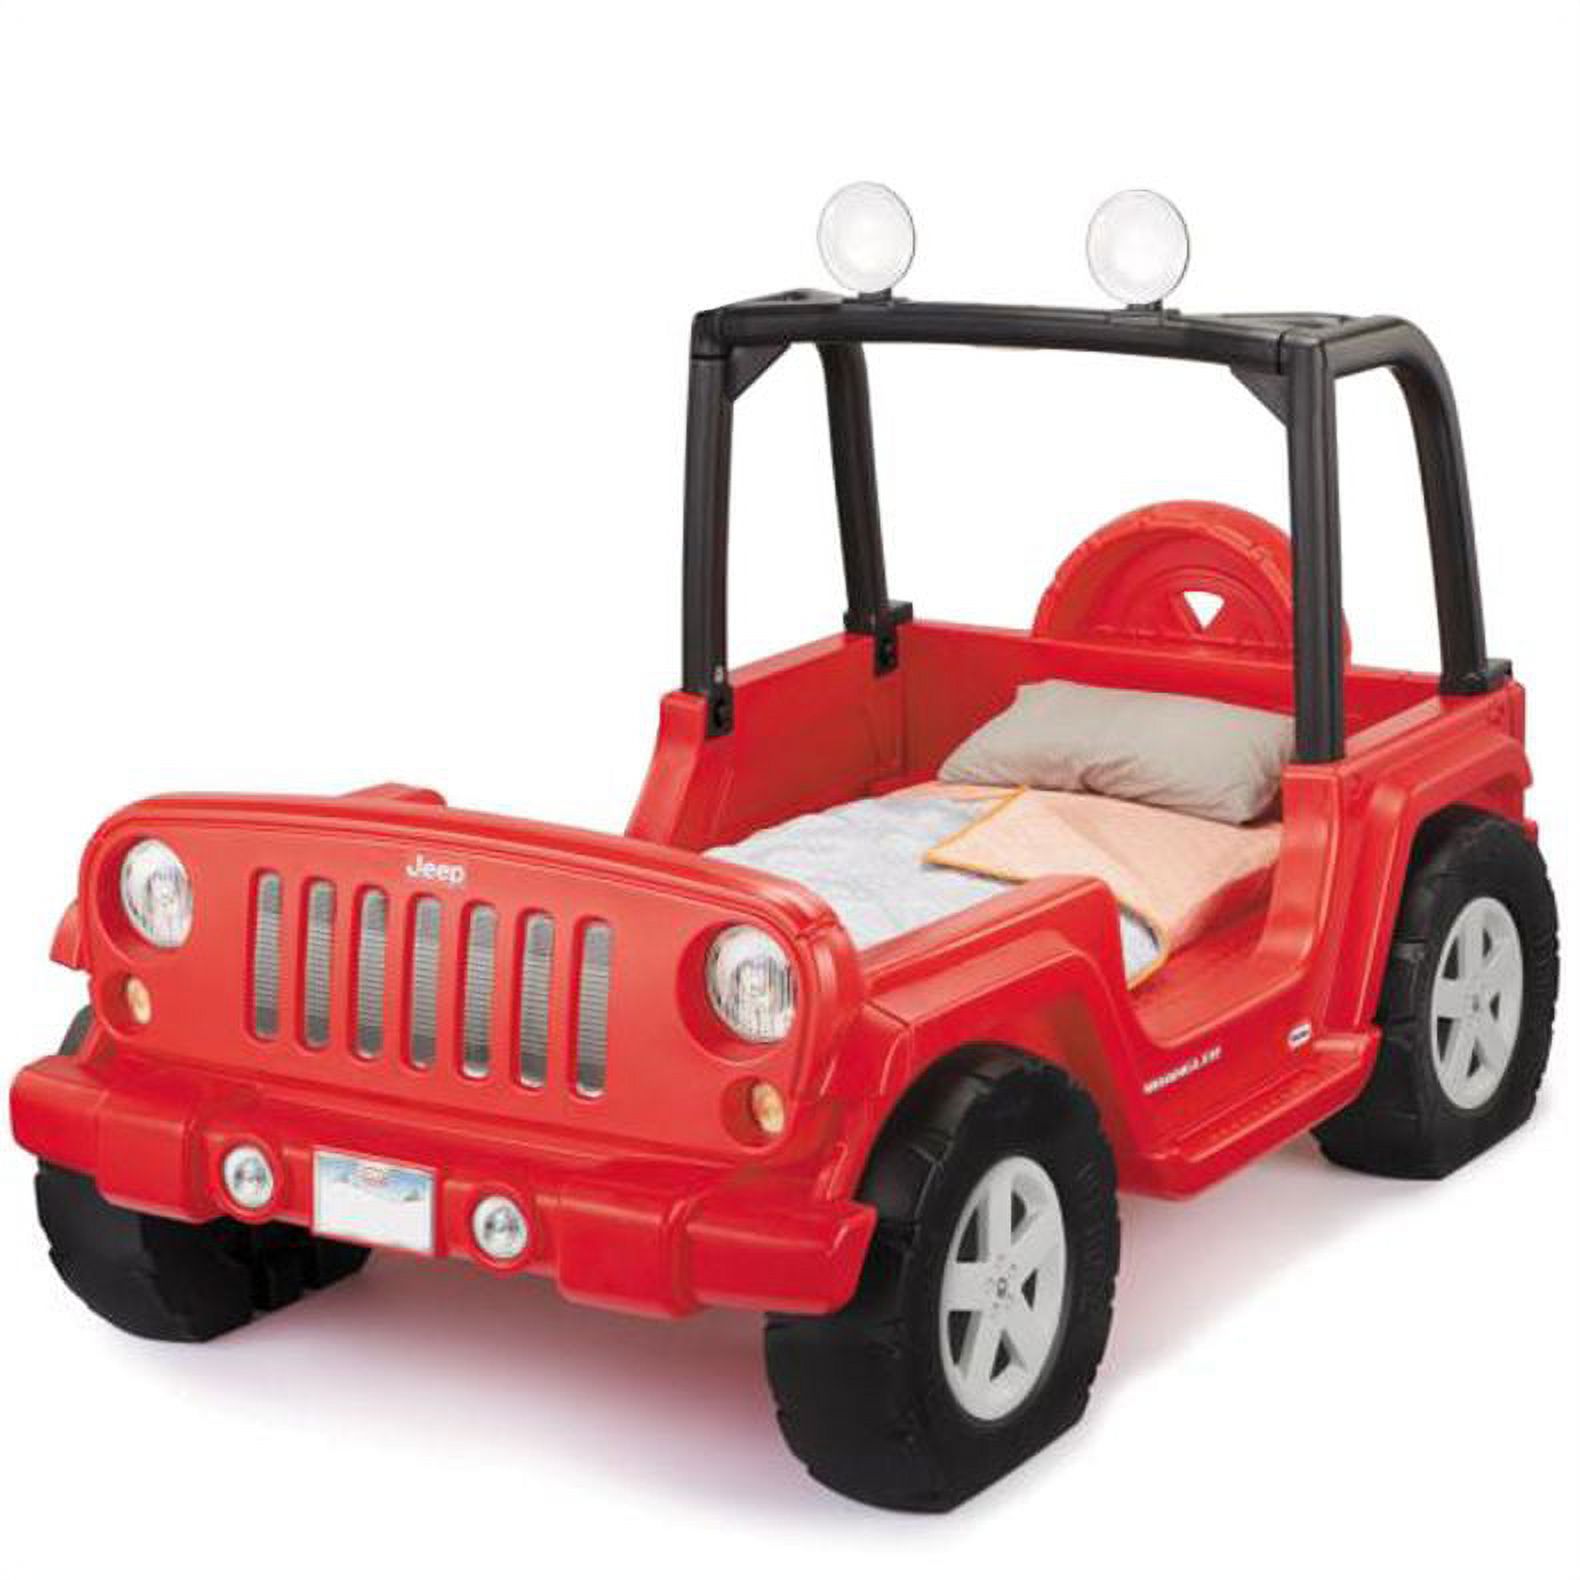 Little Tikes Jeep Wrangler Toddler-to-Twin Convertible Bed, Red - image 1 of 8